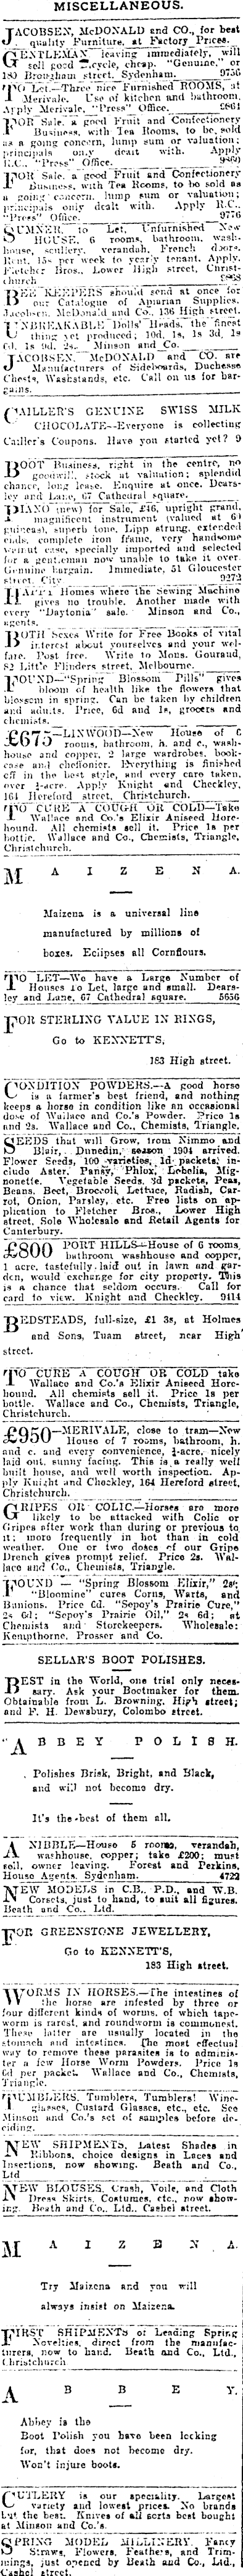 Papers Past Newspapers Press 23 November 1904 Page 10 Advertisements Column 6